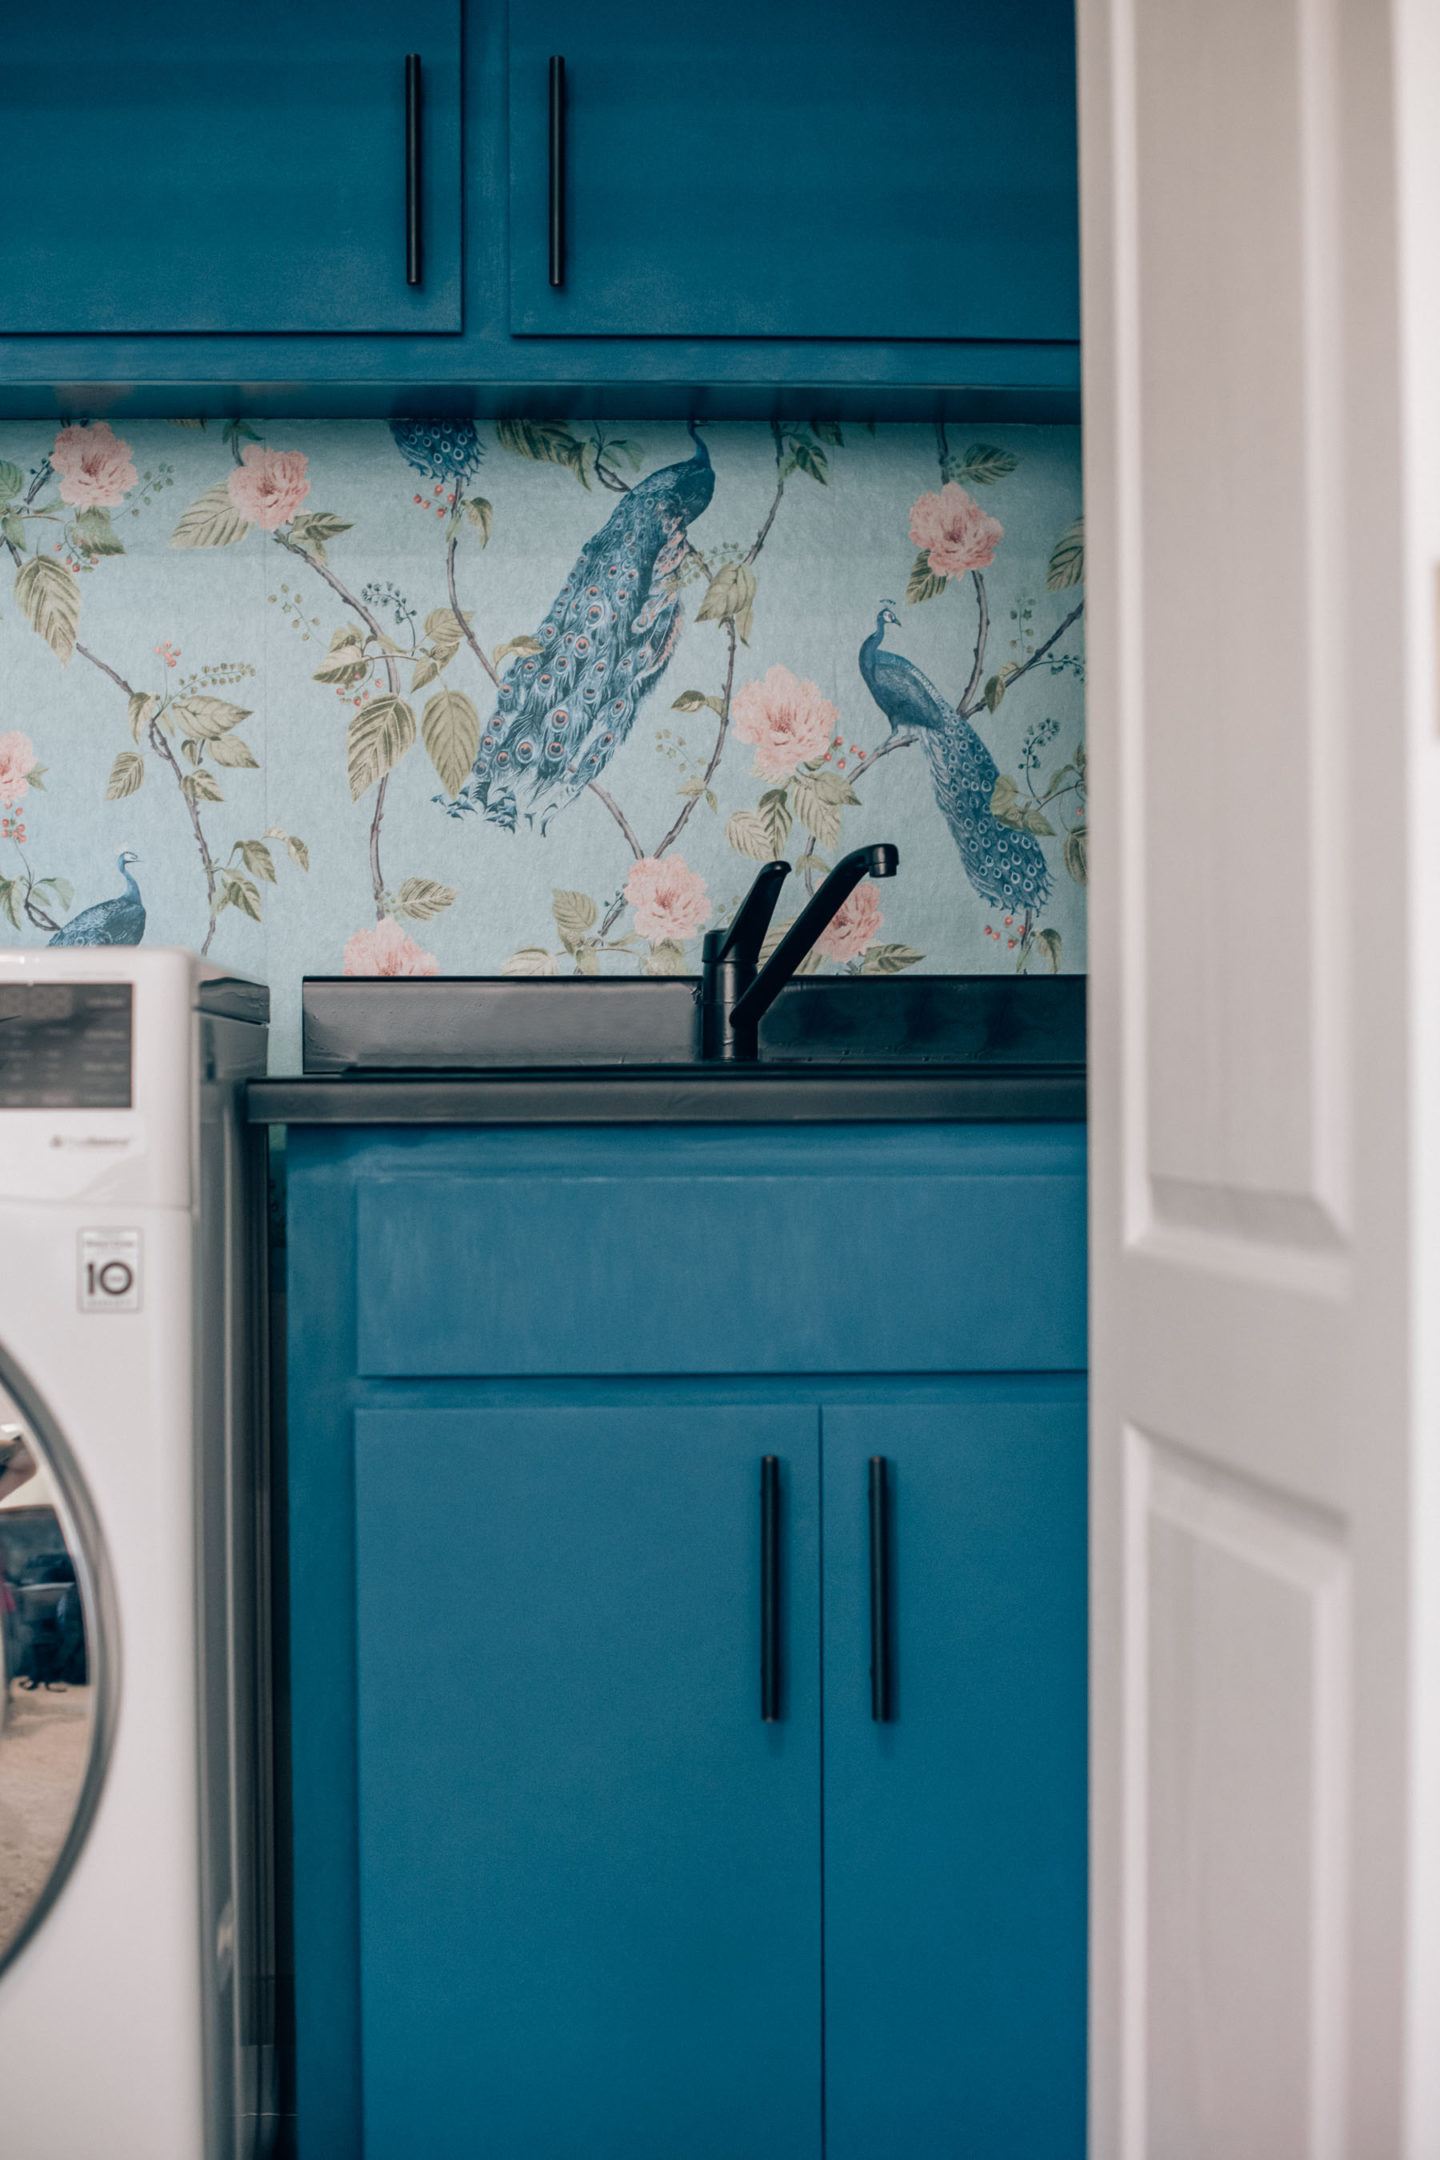 Free download colorful wallpaper designs for a laundry room small laundry  rooms 600x380 for your Desktop Mobile  Tablet  Explore 47 Laundry  Room Wallpaper Ideas  Wallpaper Ideas for Living Room